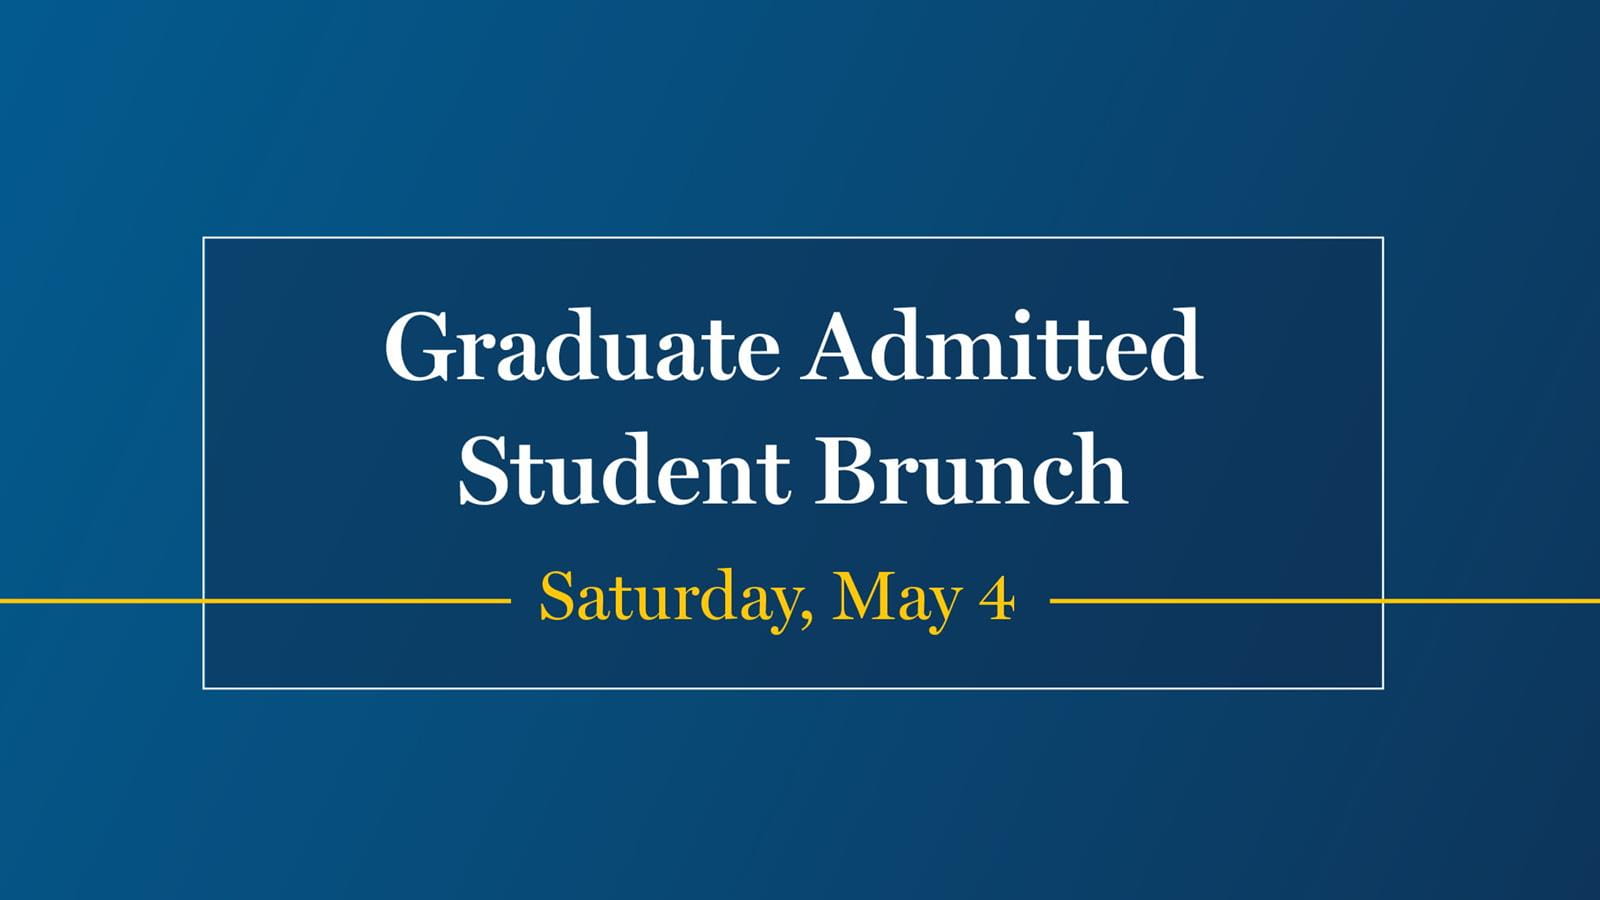 Graduate Admitted Student Brunch